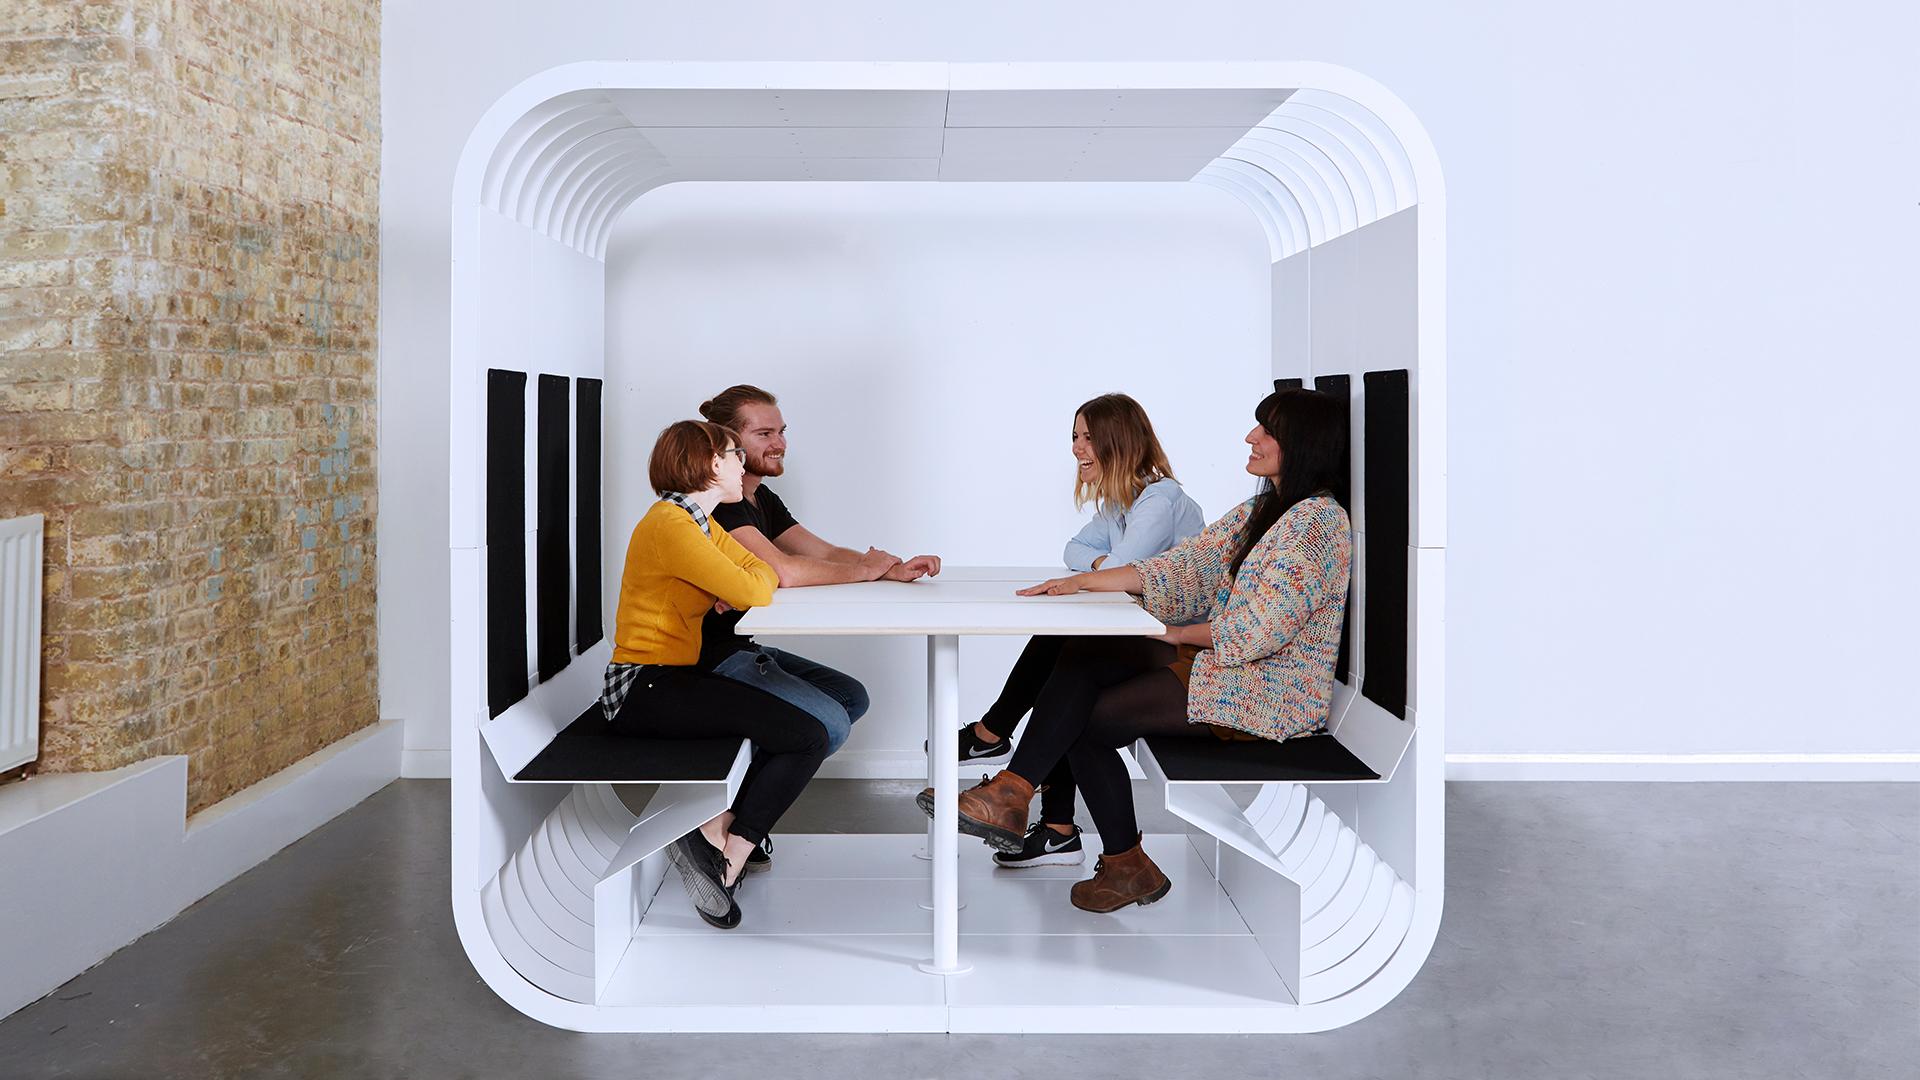 These Japanese-inspired meeting Pods are the perfect space for meetings, tea ceremonies, and a peaceful break in the working day.

Productivity at work and job satisfaction are strongly influenced by the working environment, which also stimulates